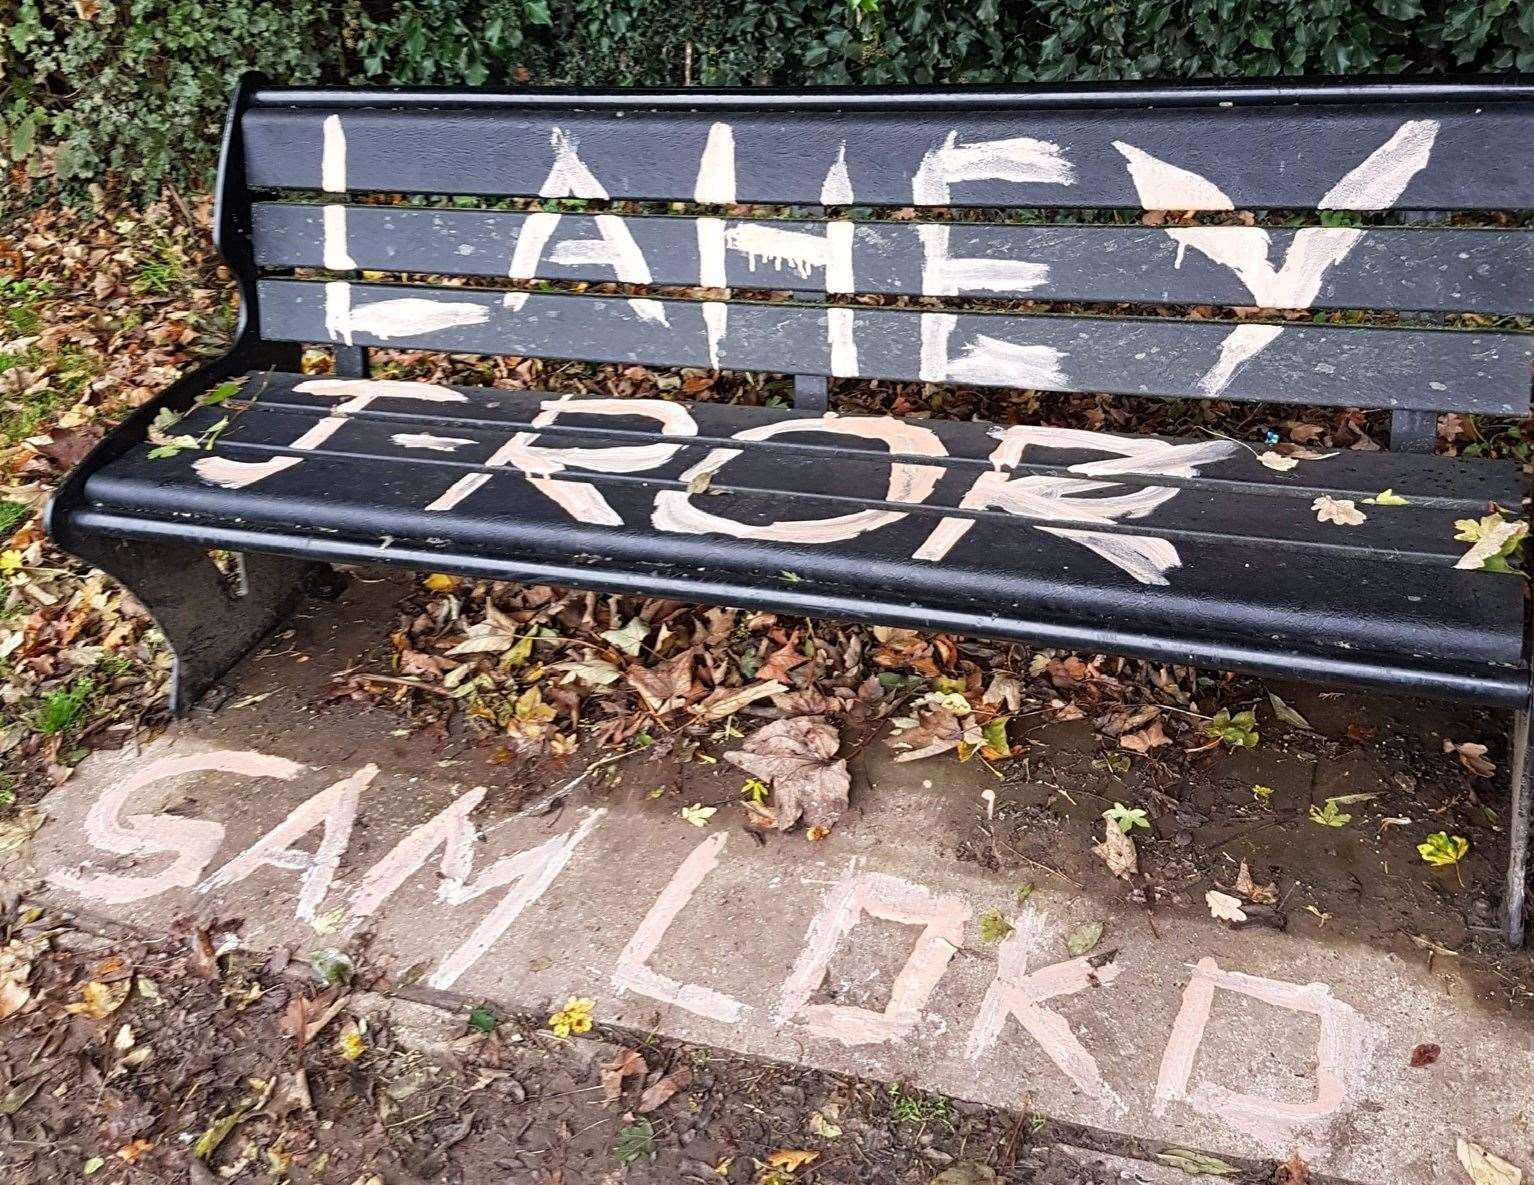 Names have been sprayed onto benches in the park. Picture: Sharon Hobley